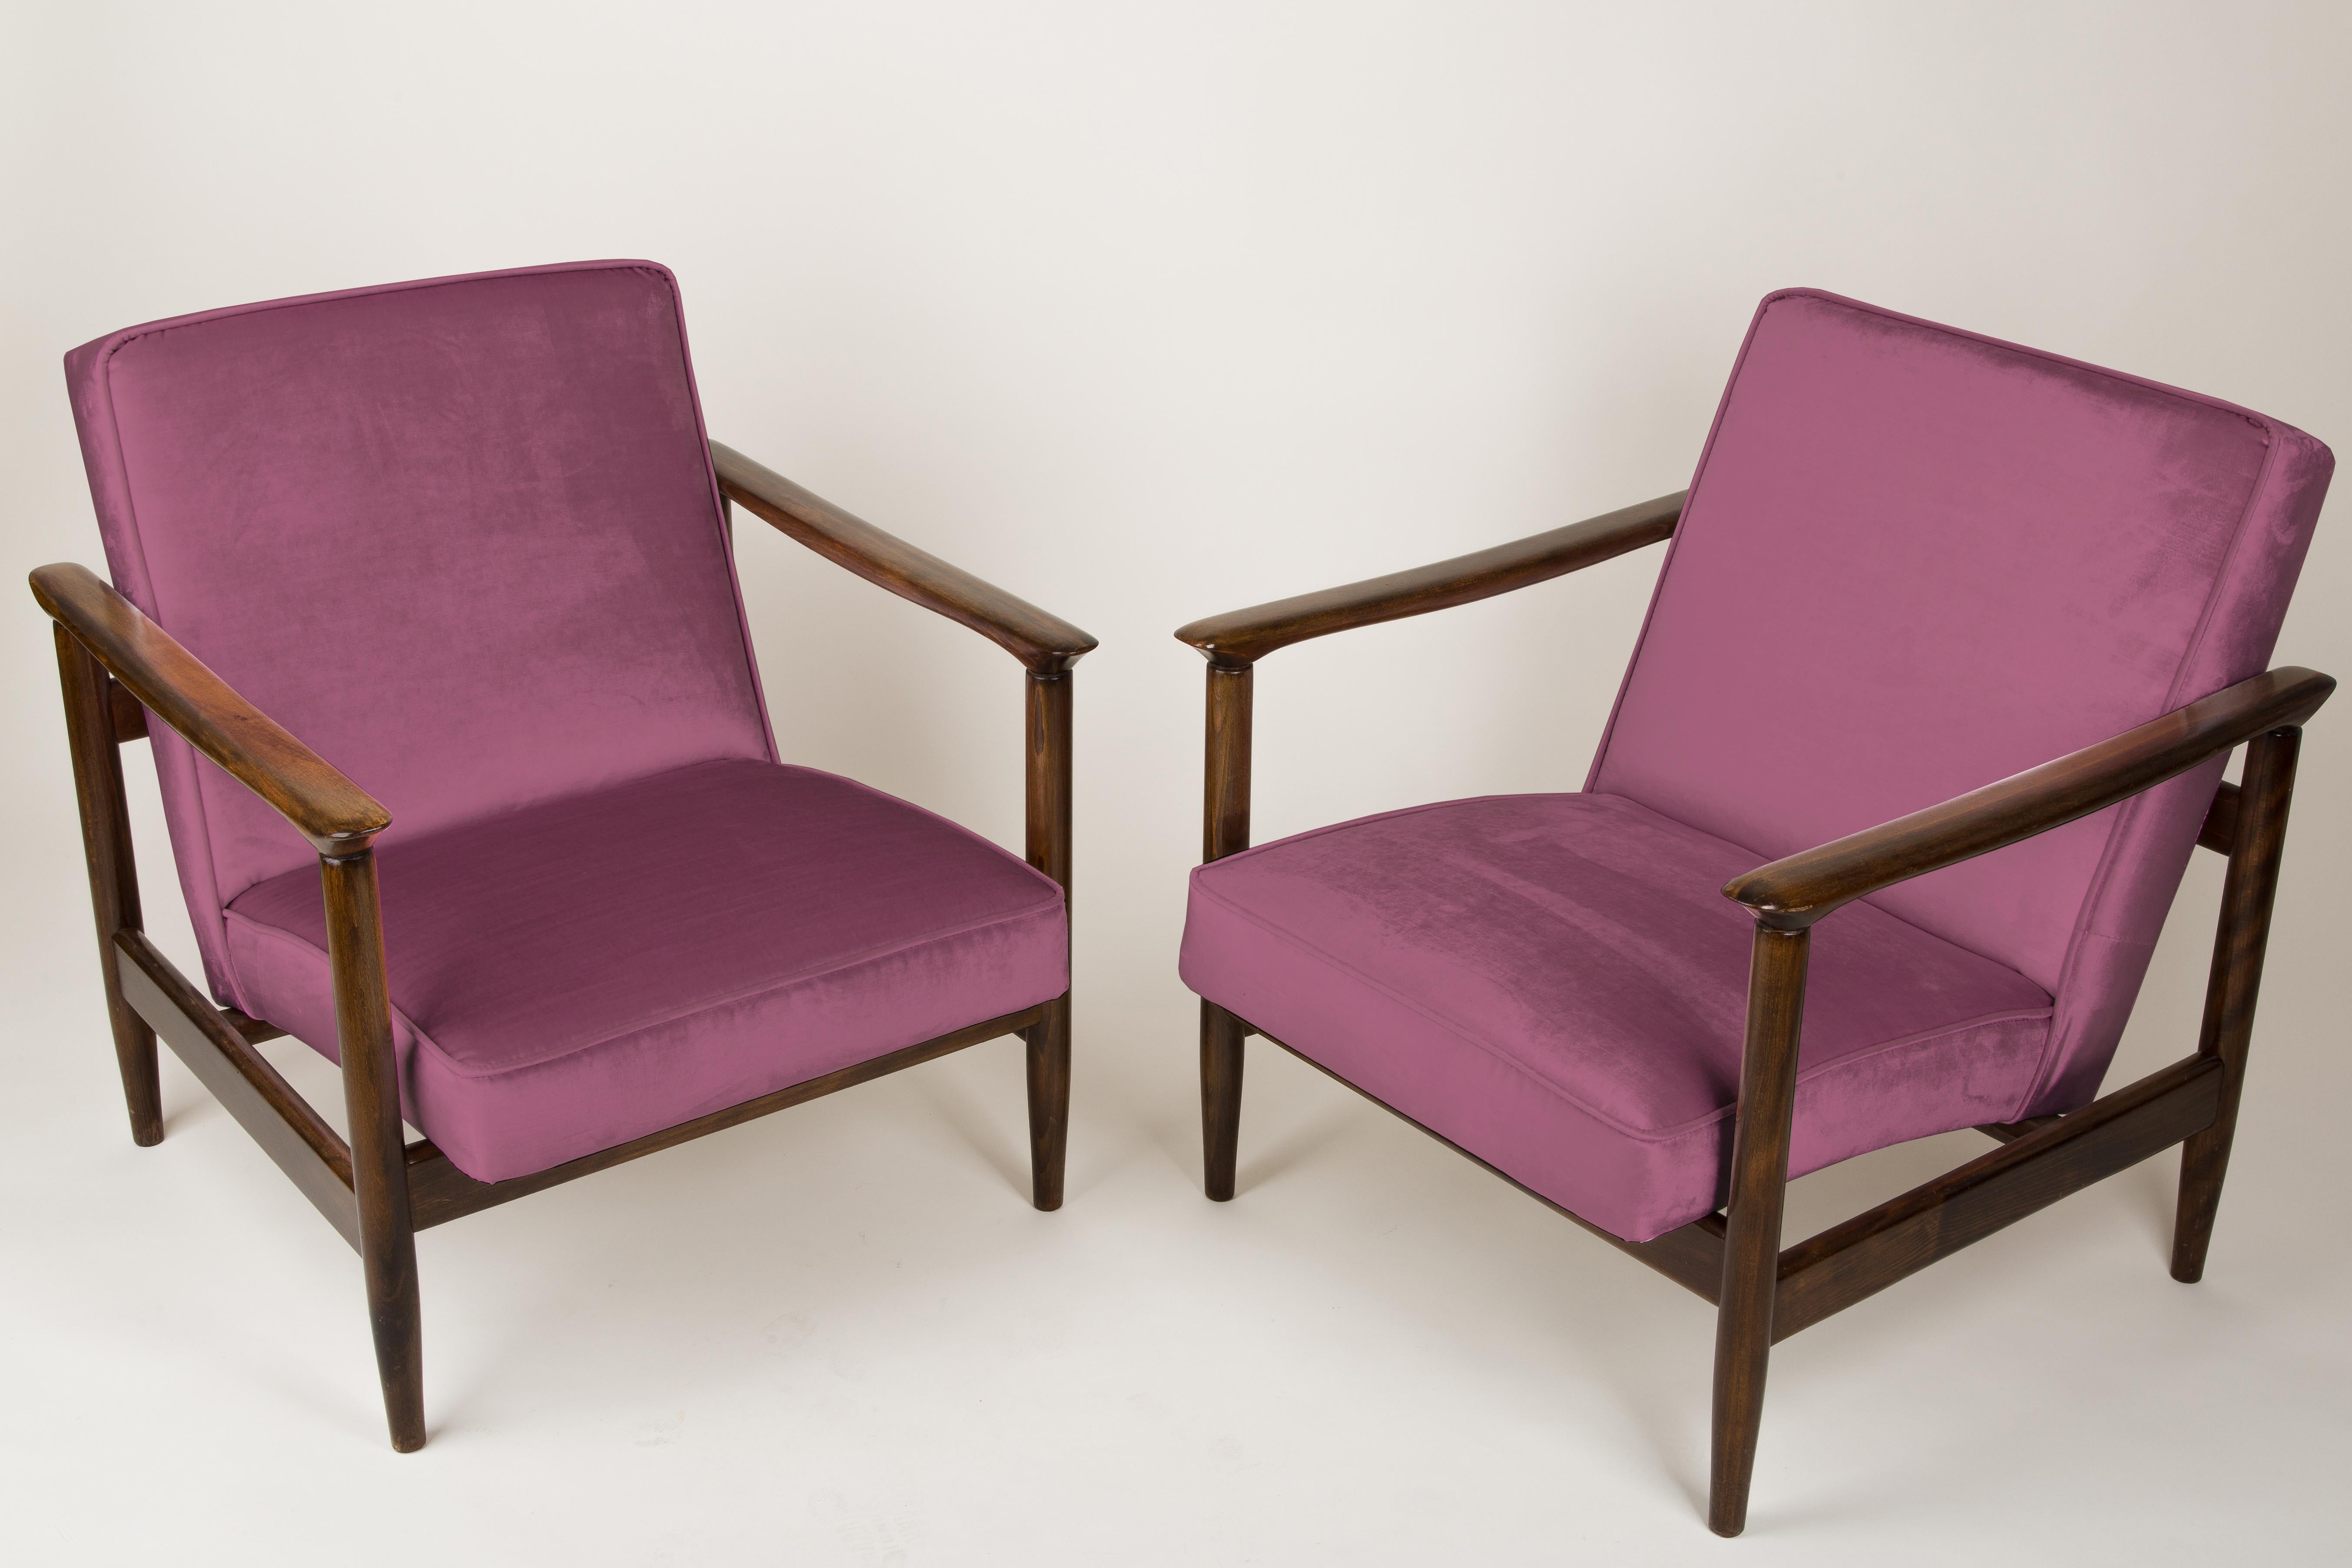 A pair of armchairs GFM-142, designed by Edmund Homa. The armchairs were made in the 1960s in the Goscieninska Furniture factory. They are made from solid beechwood. The GFM-142 armchair is regarded one of the best polish armchair design from the